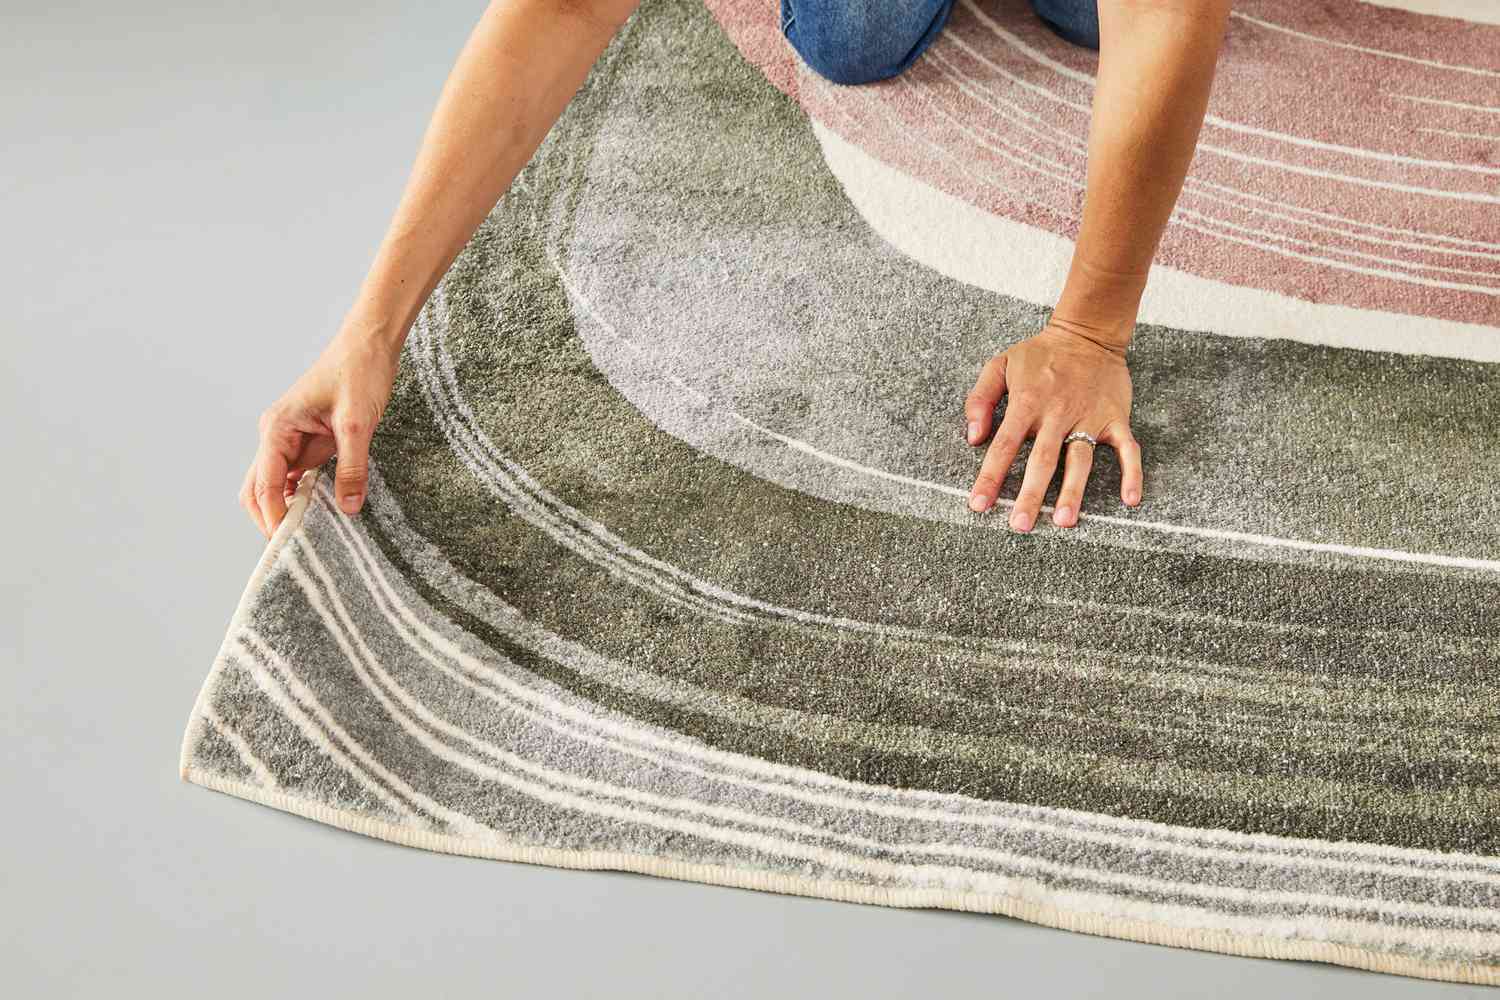 A person adjusting the West Elm Waterfall Washable Rug